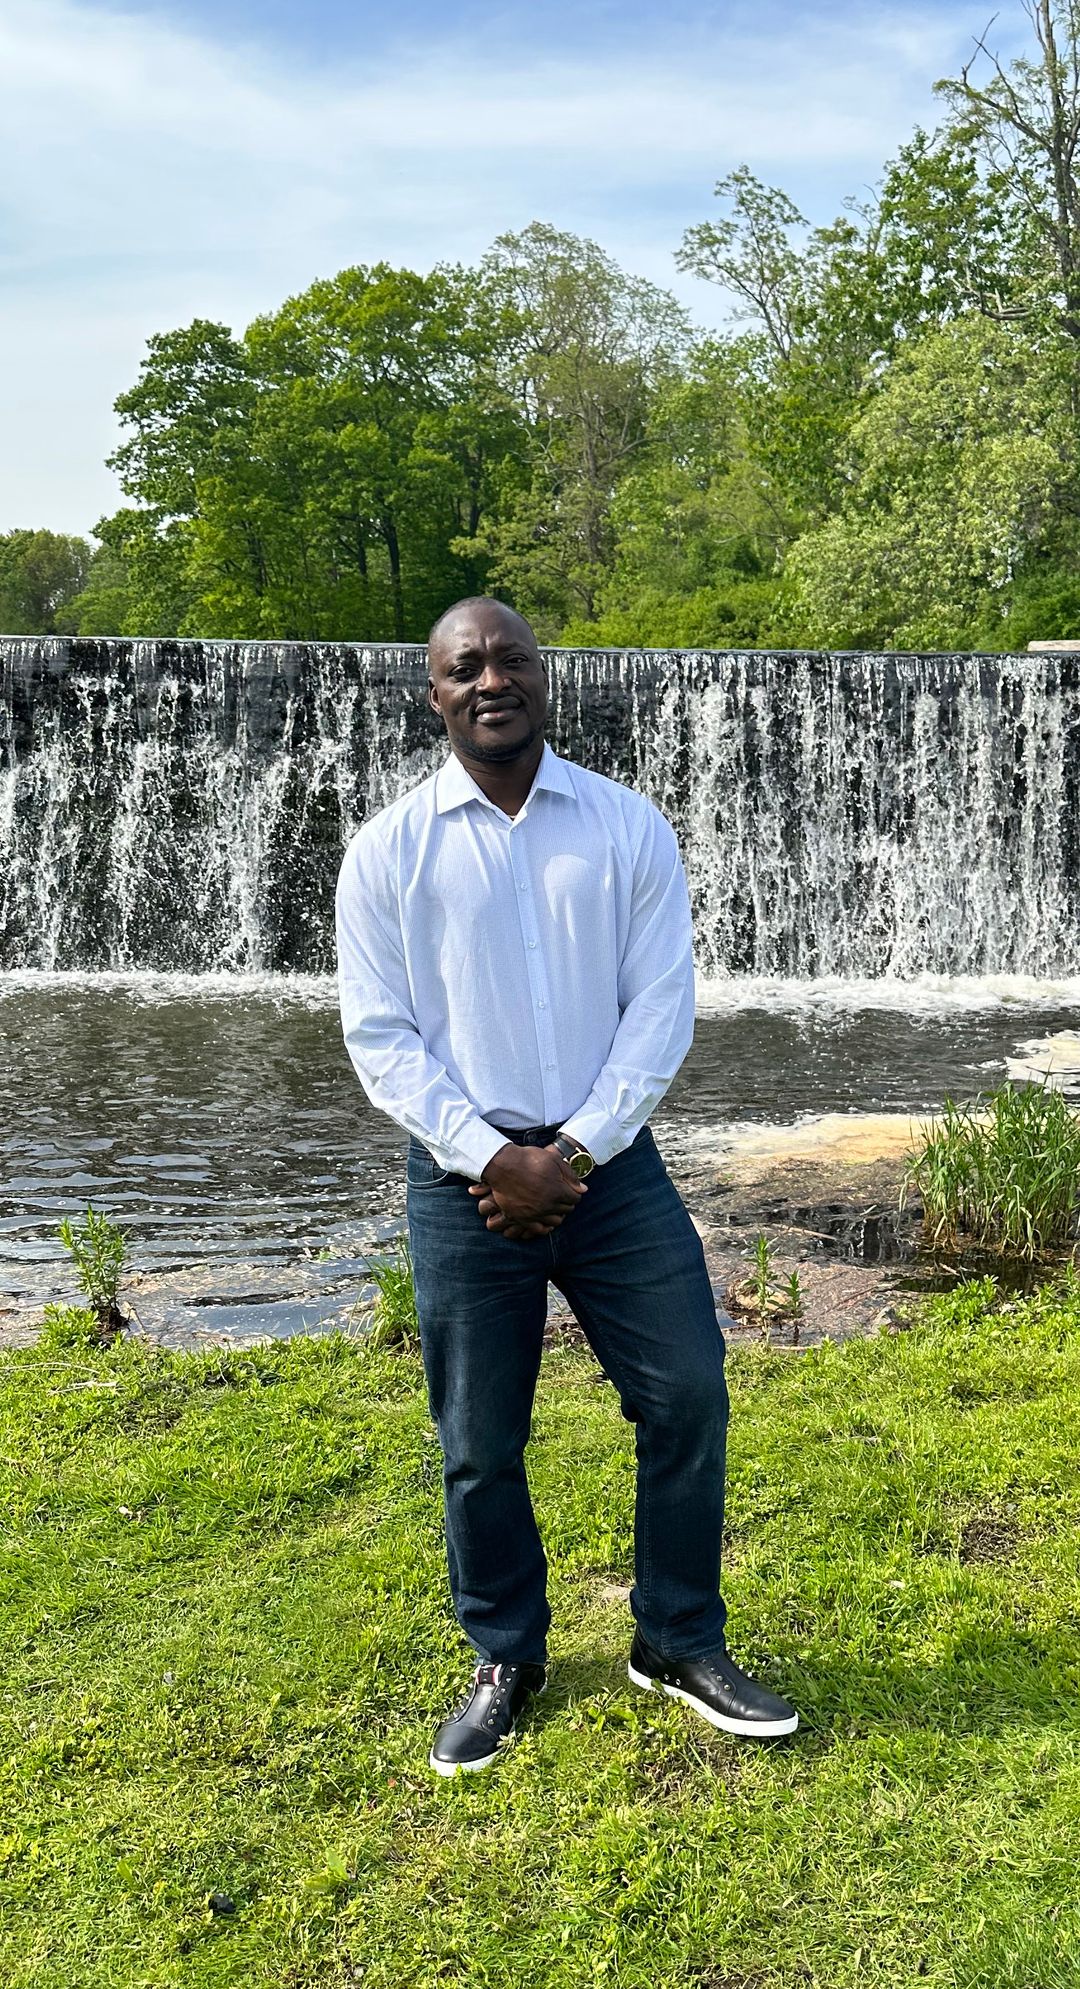 Larry Sanni standing on green grass with waterfall and trees in background